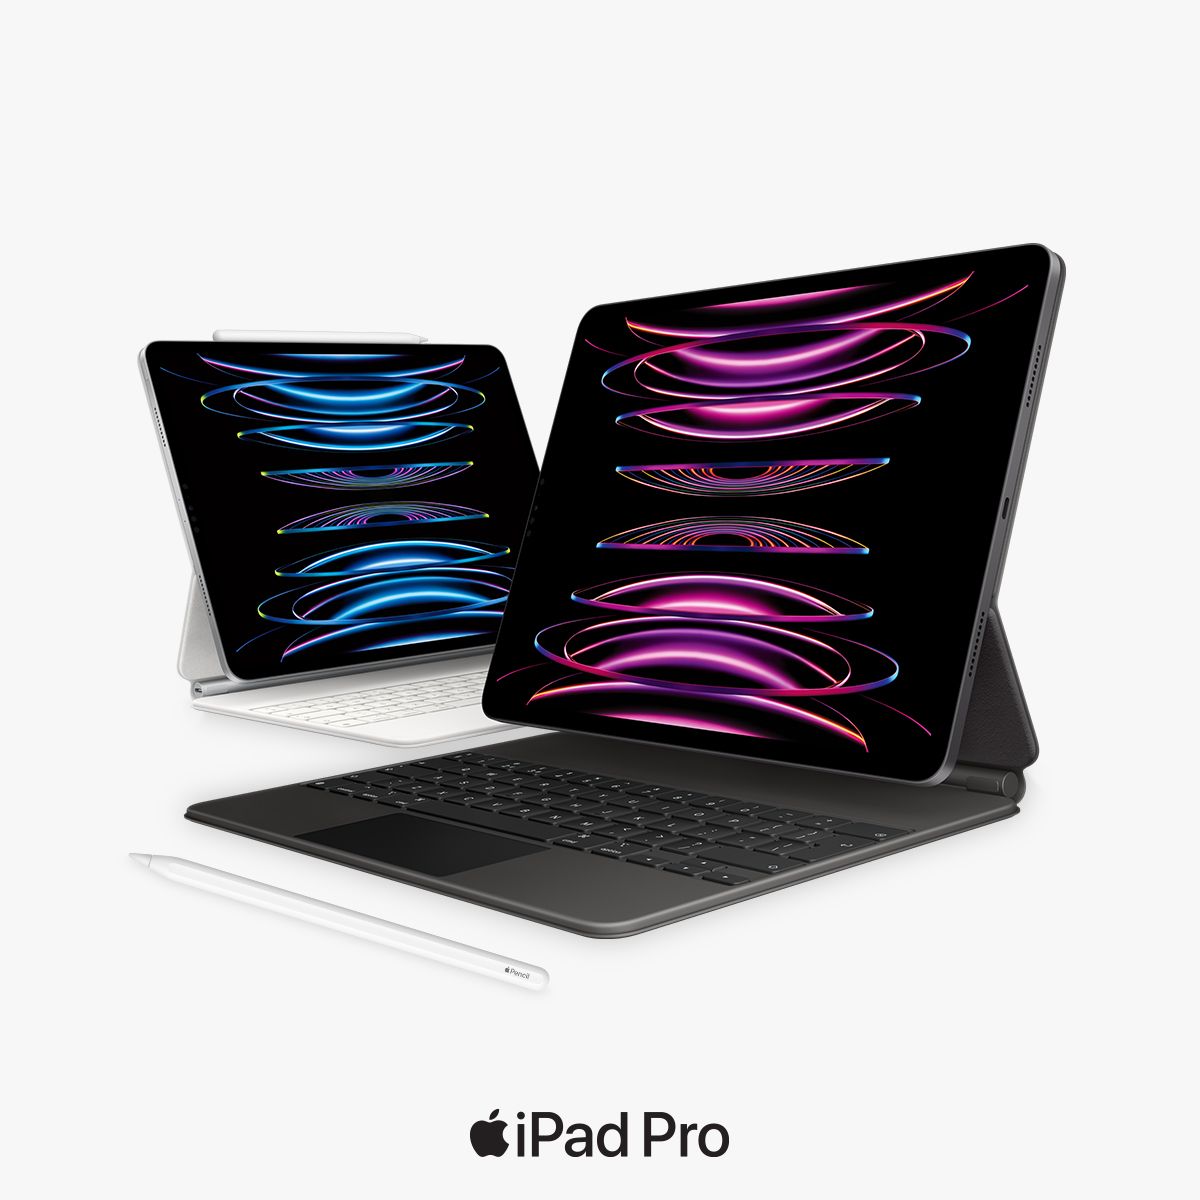 Do more with iPad Pro bundles